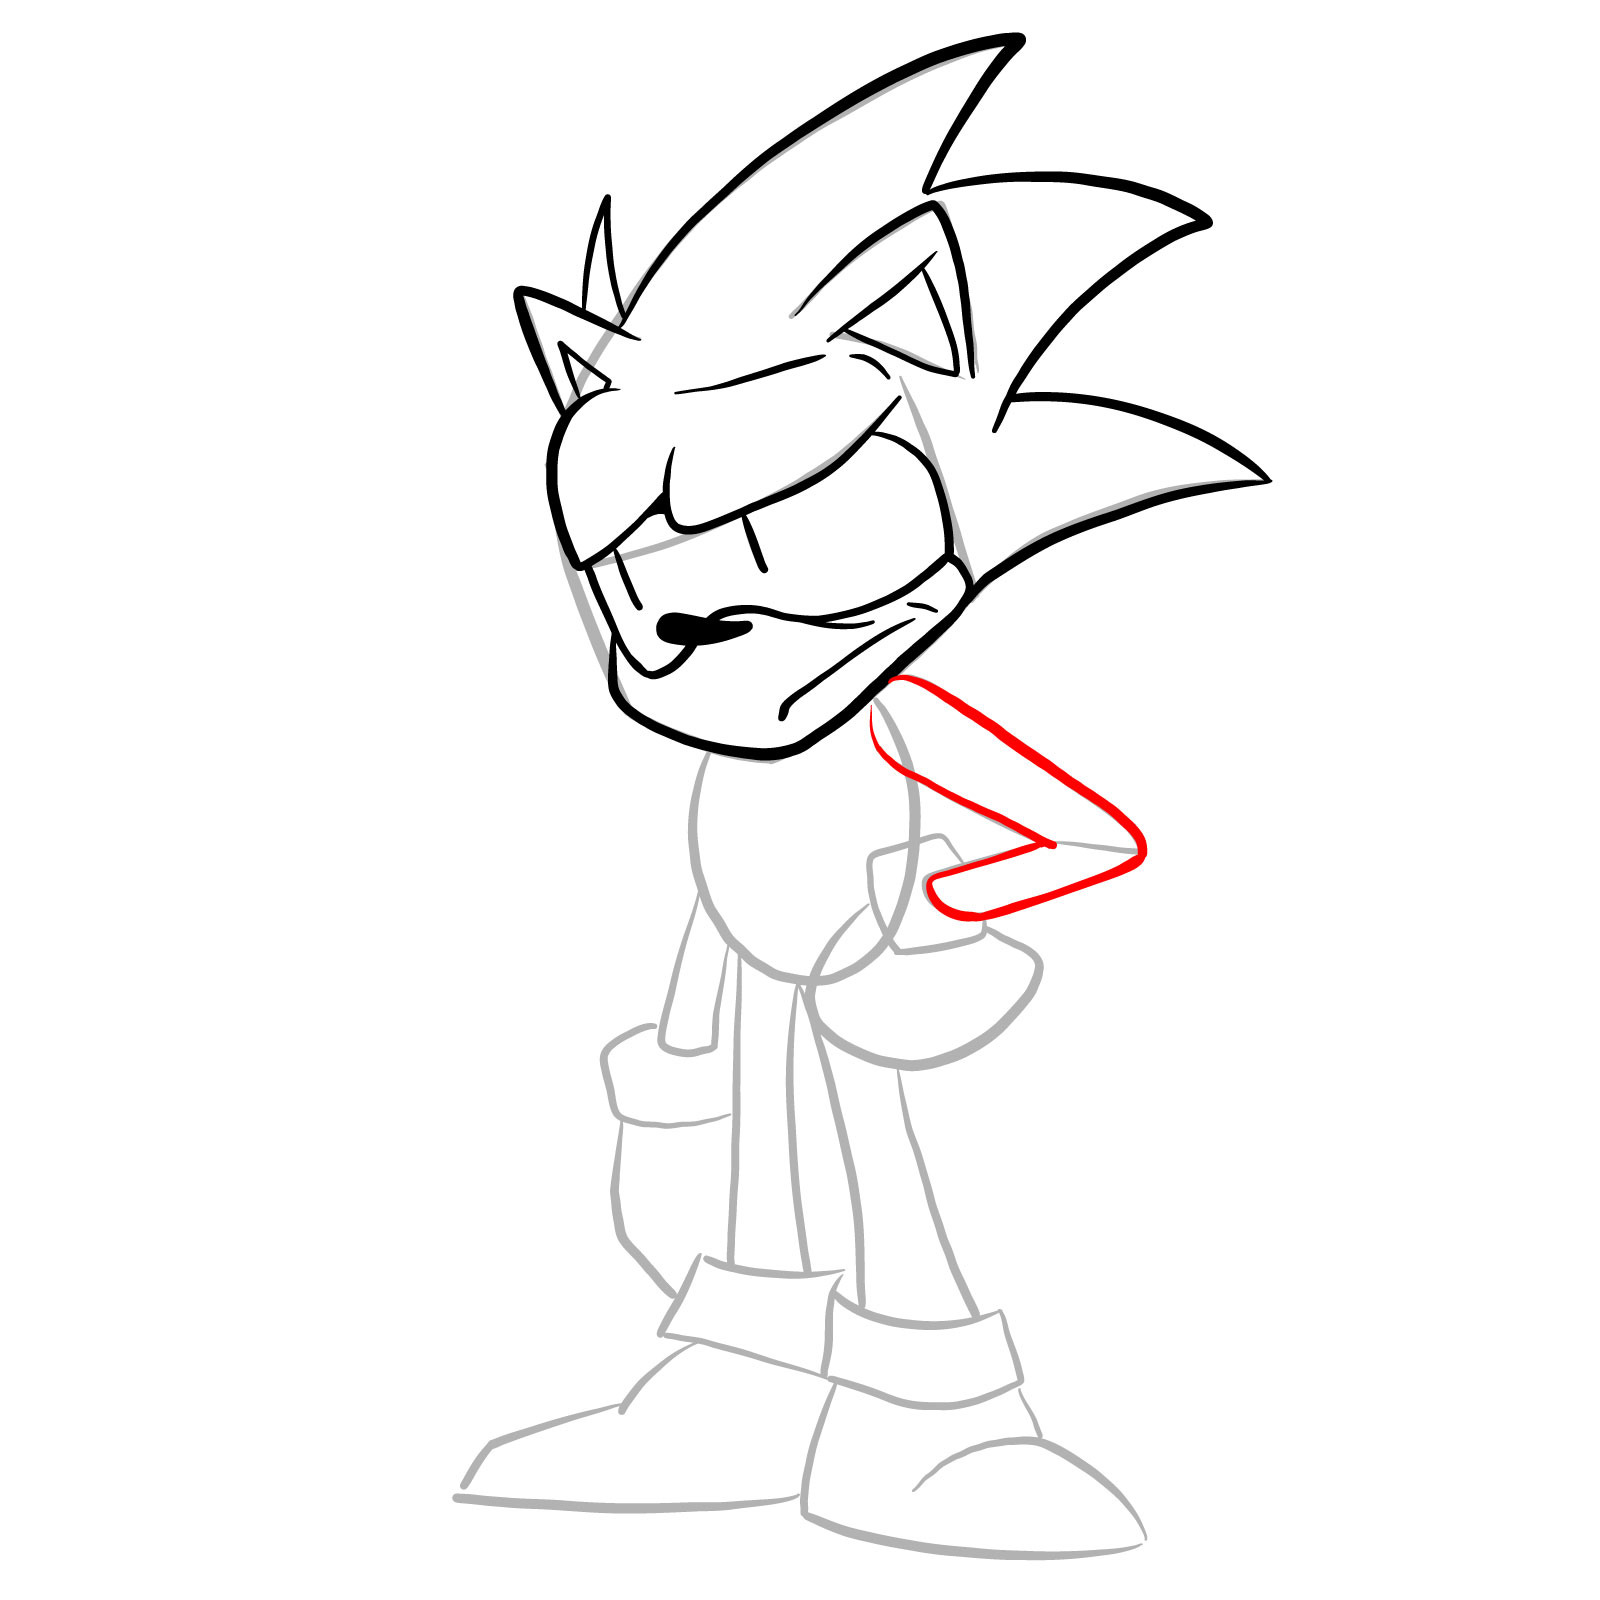 How to draw Sonic - FNF: Secret Histories - step 13